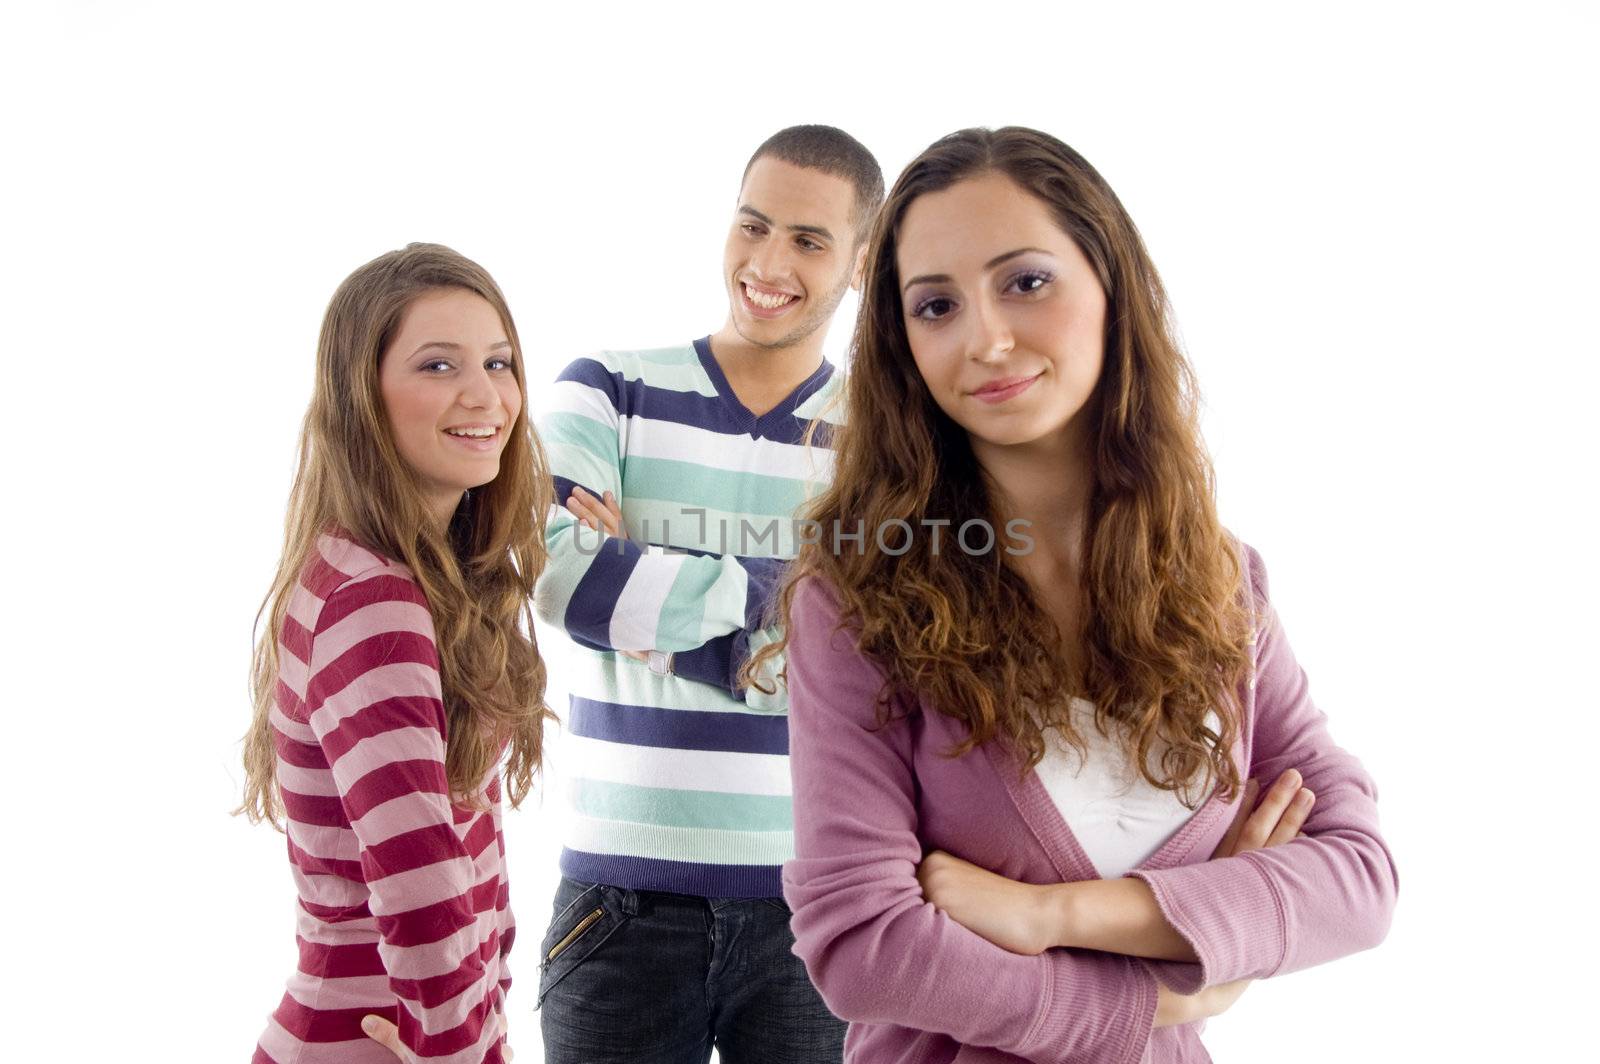 smiling group of teens against white background